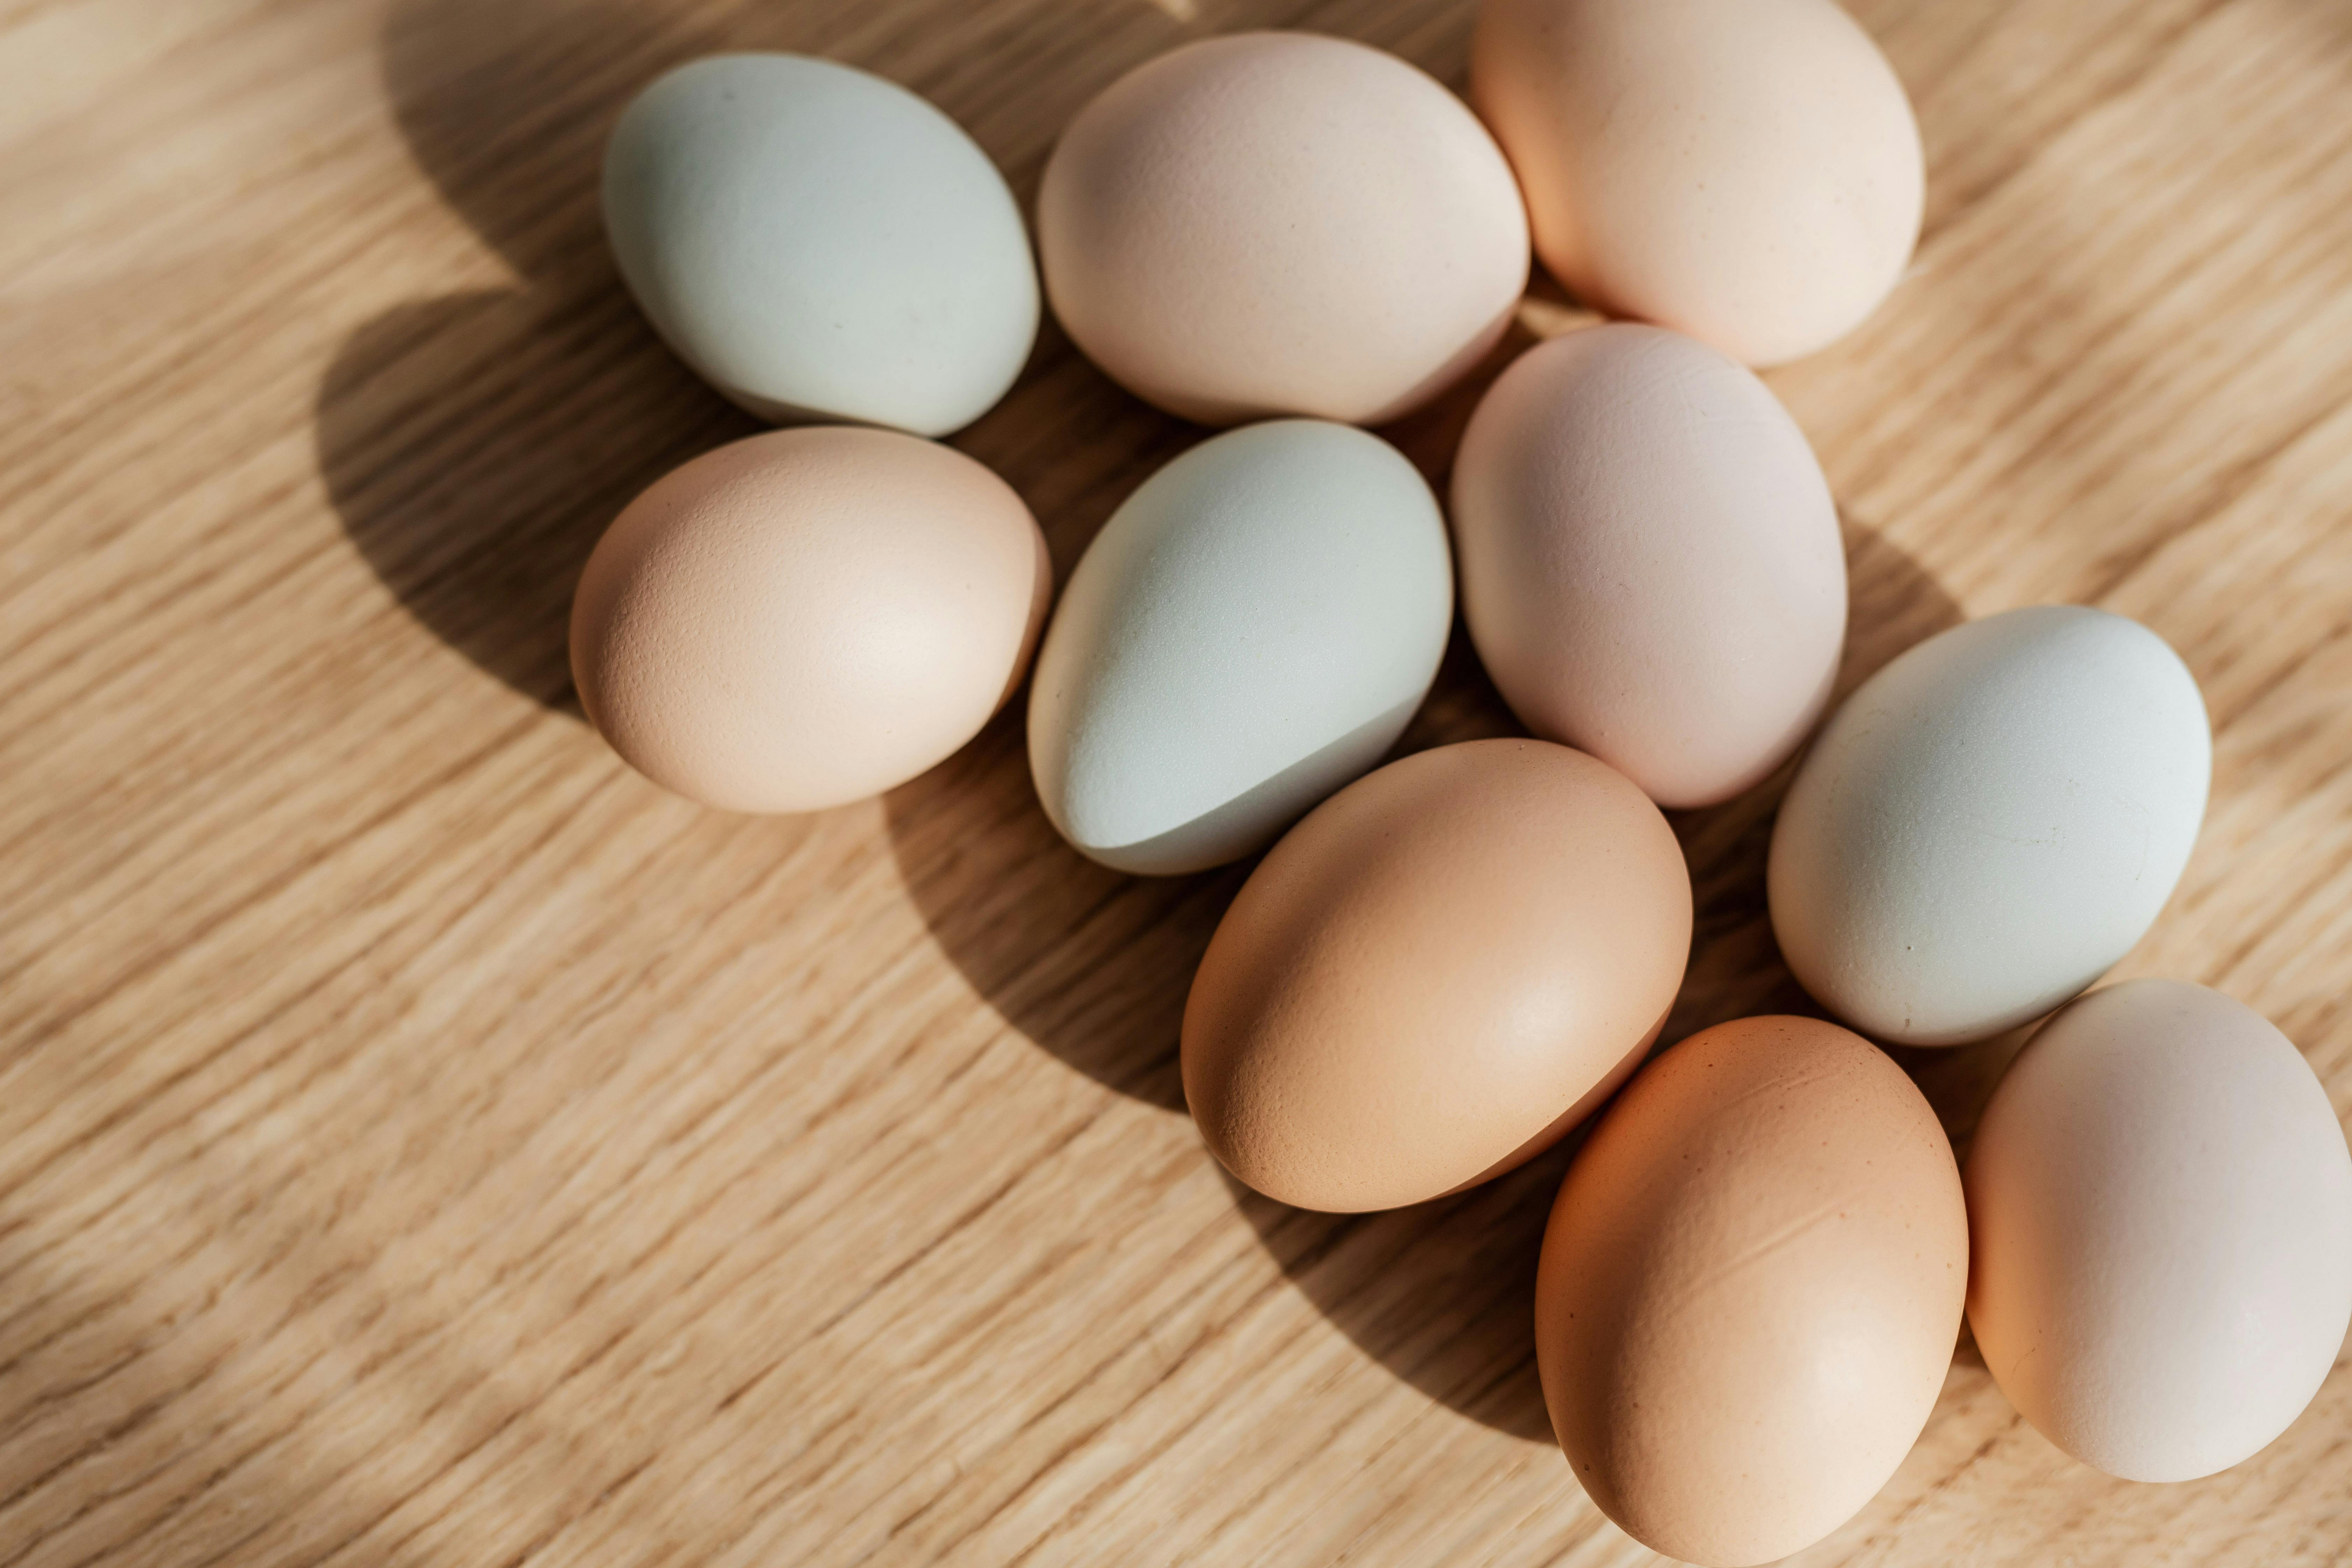 Bunch of eggs on wooden table. | Photo: Pexels